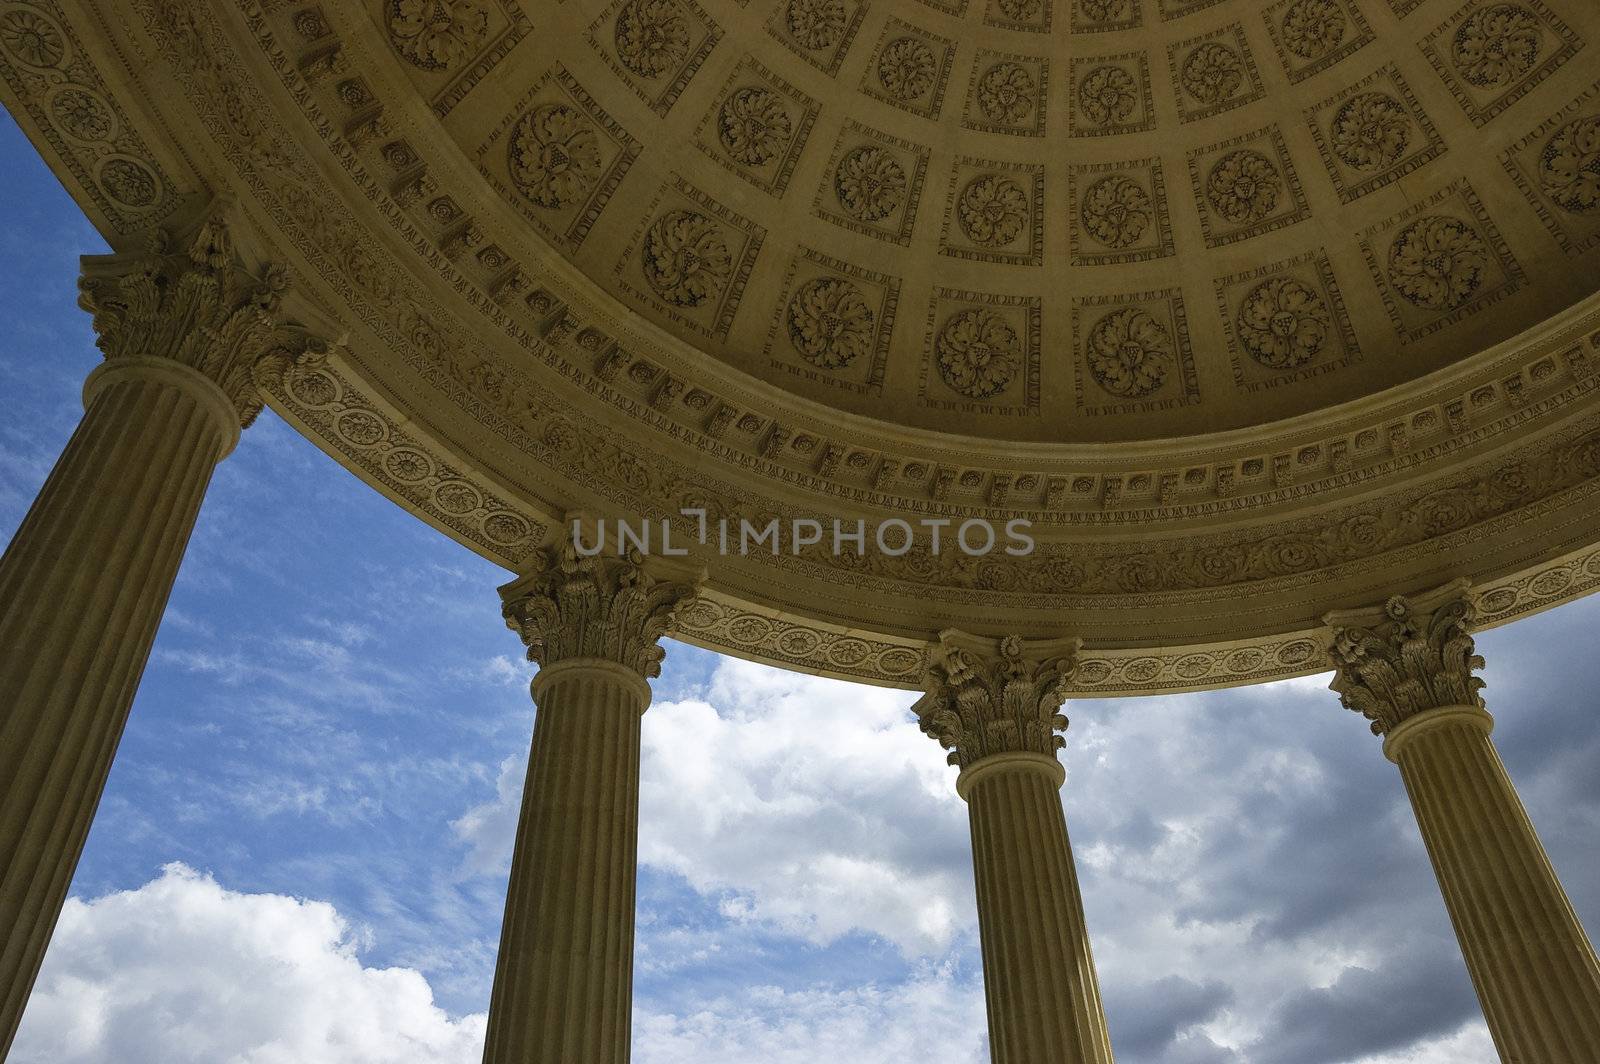 Wide-angle view from below showing details of the cupola of the Temple of Love in Marie-Antoniette's Estate in Versailles, Paris, France, including four Corinthian columns, sky and clouds